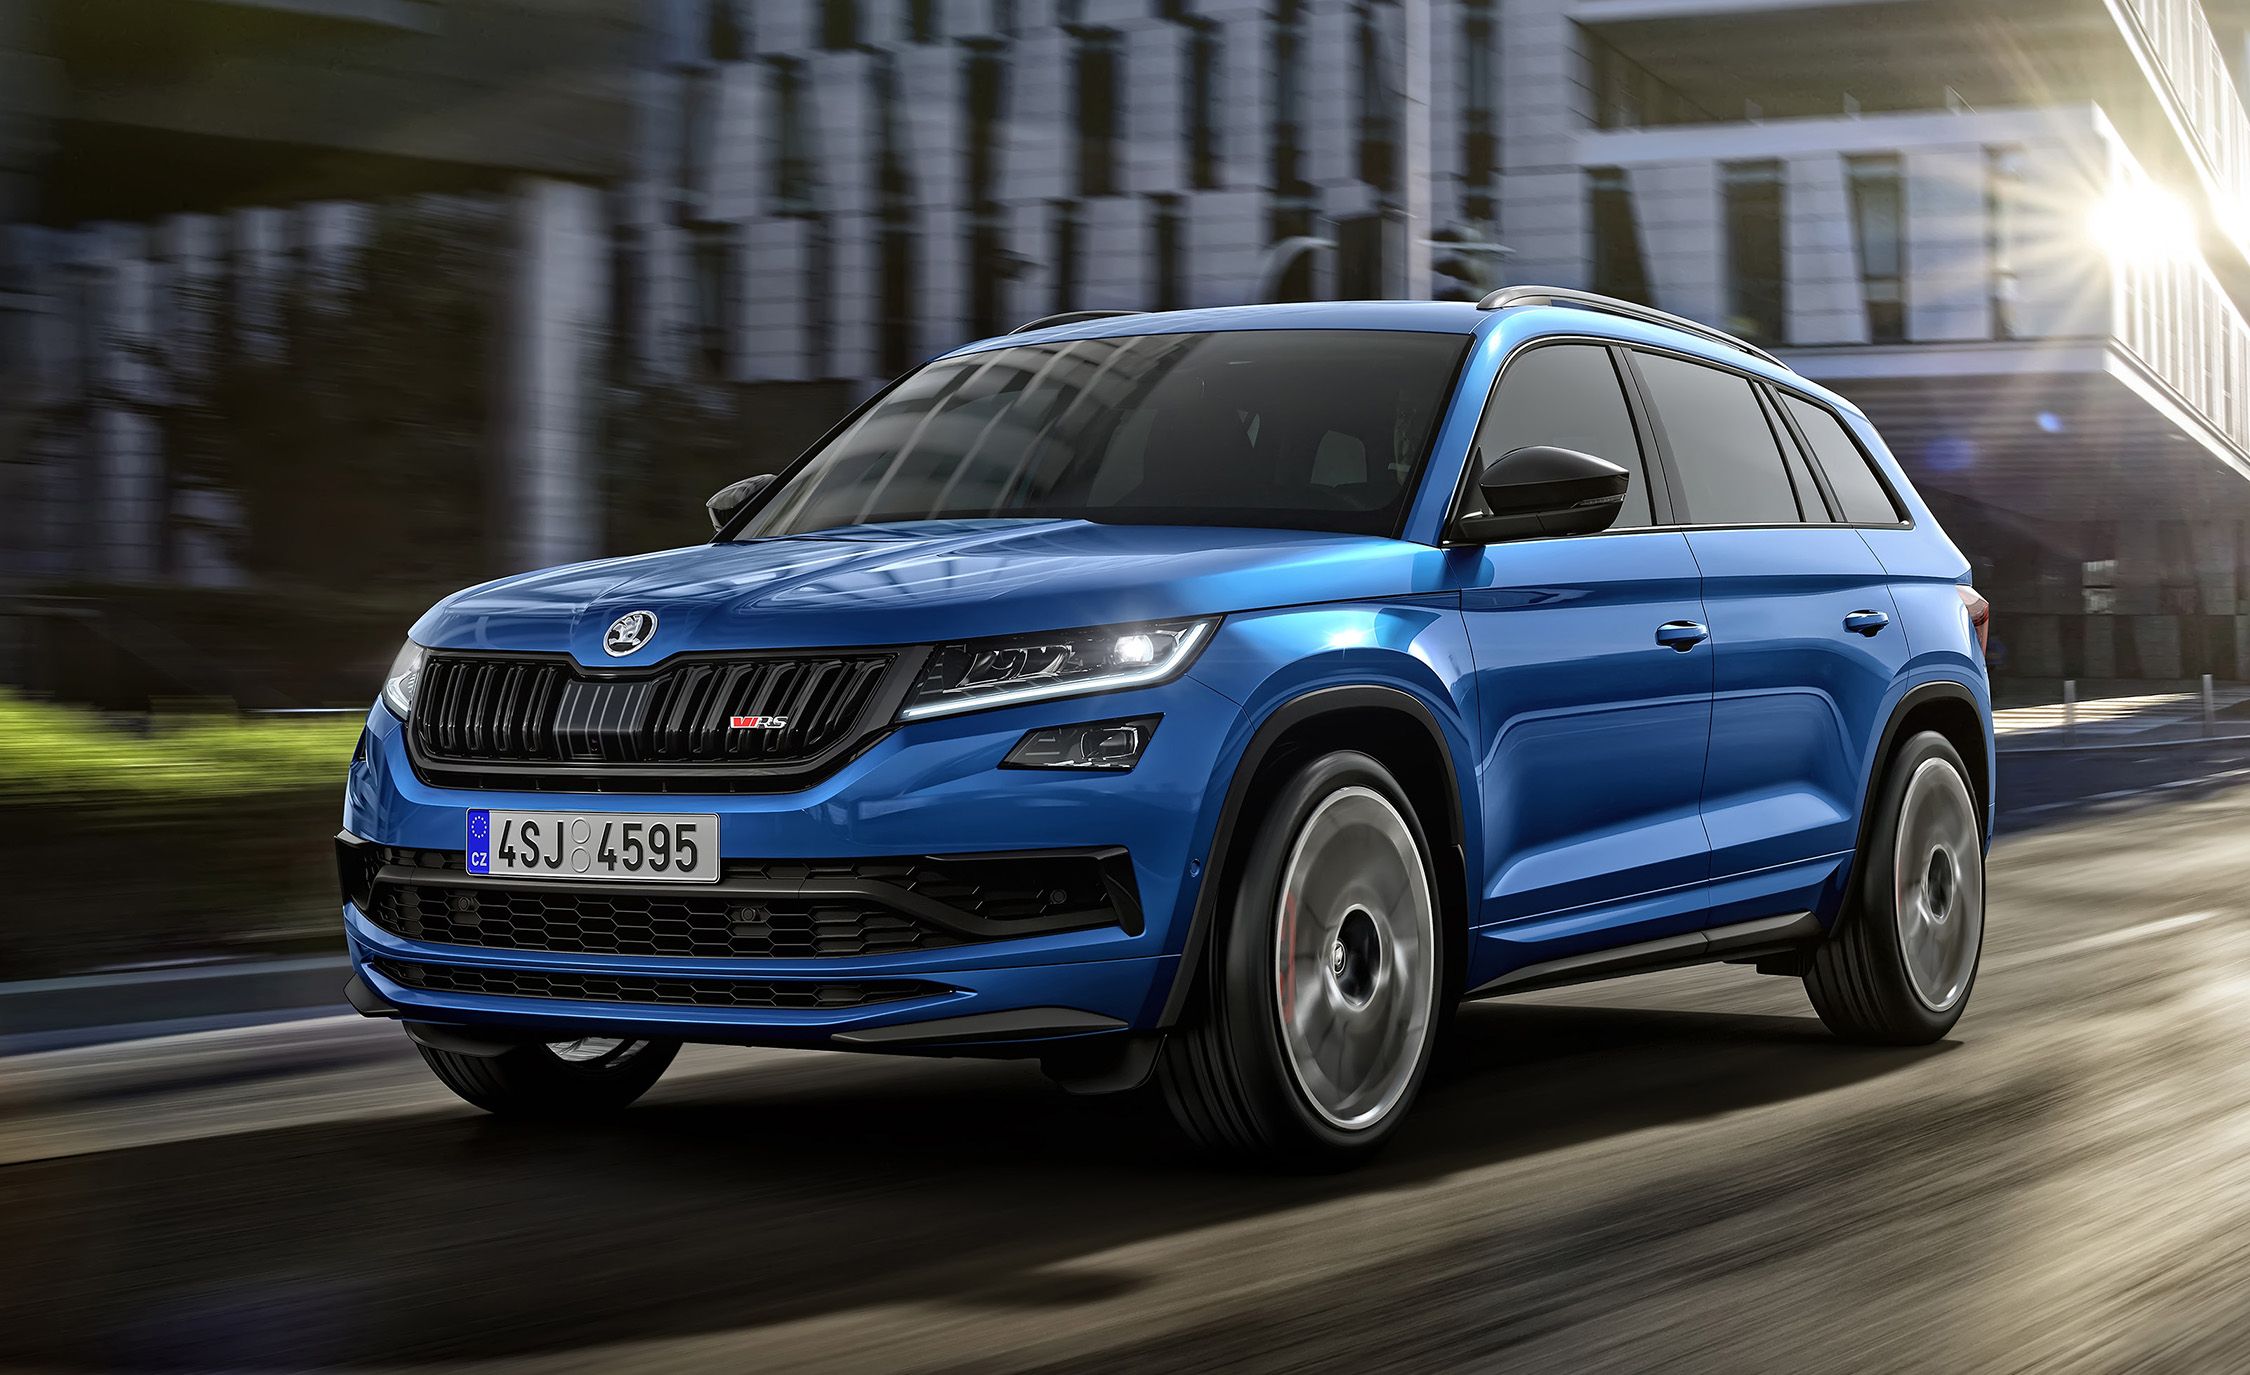 The New Skoda Kodiaq RS SUV Is a Nurburgring Holder